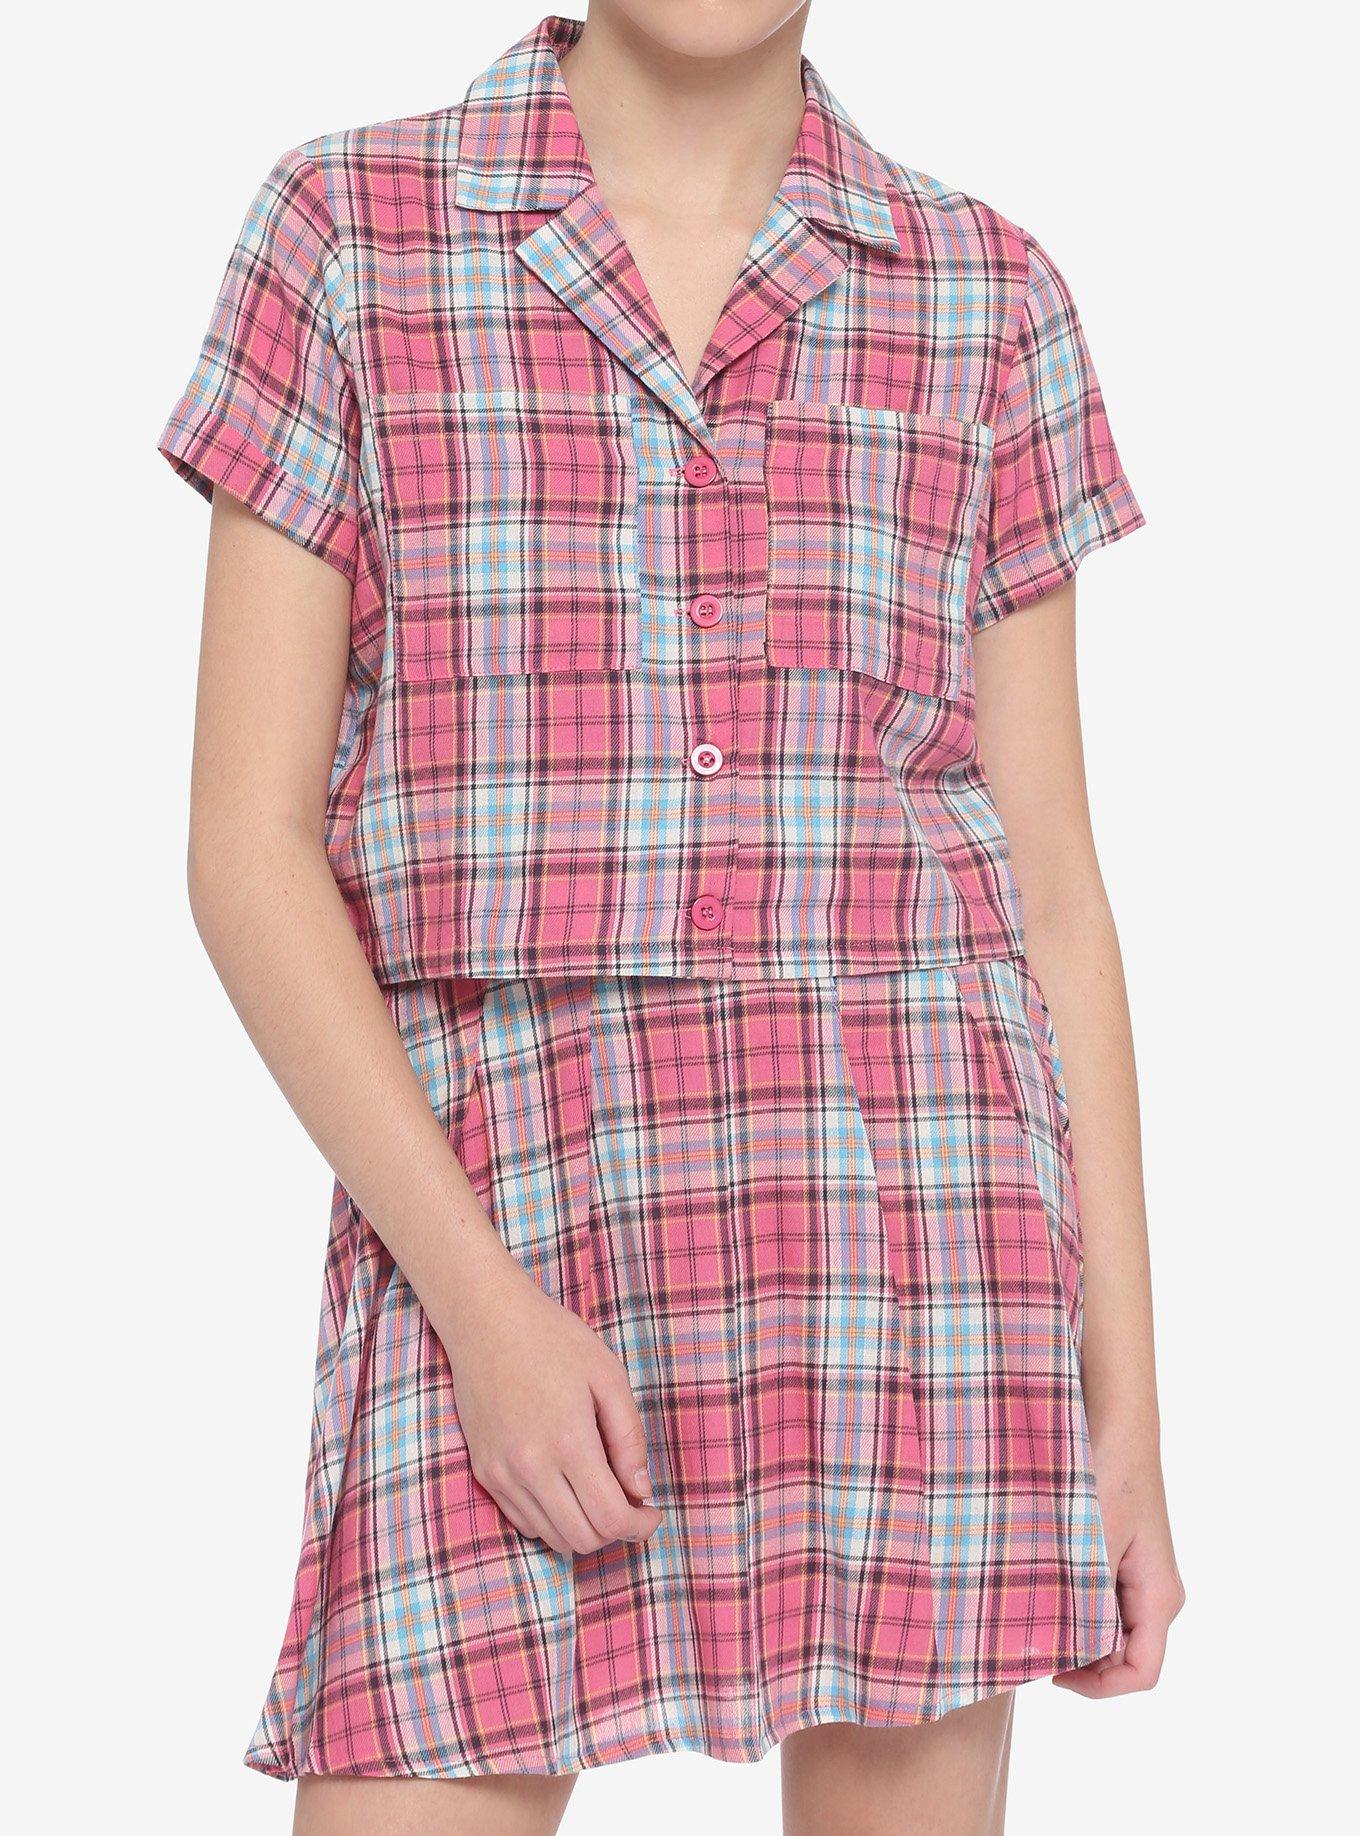 Daisy Street Pink Plaid Girls Woven Button-Up, PLAID, hi-res